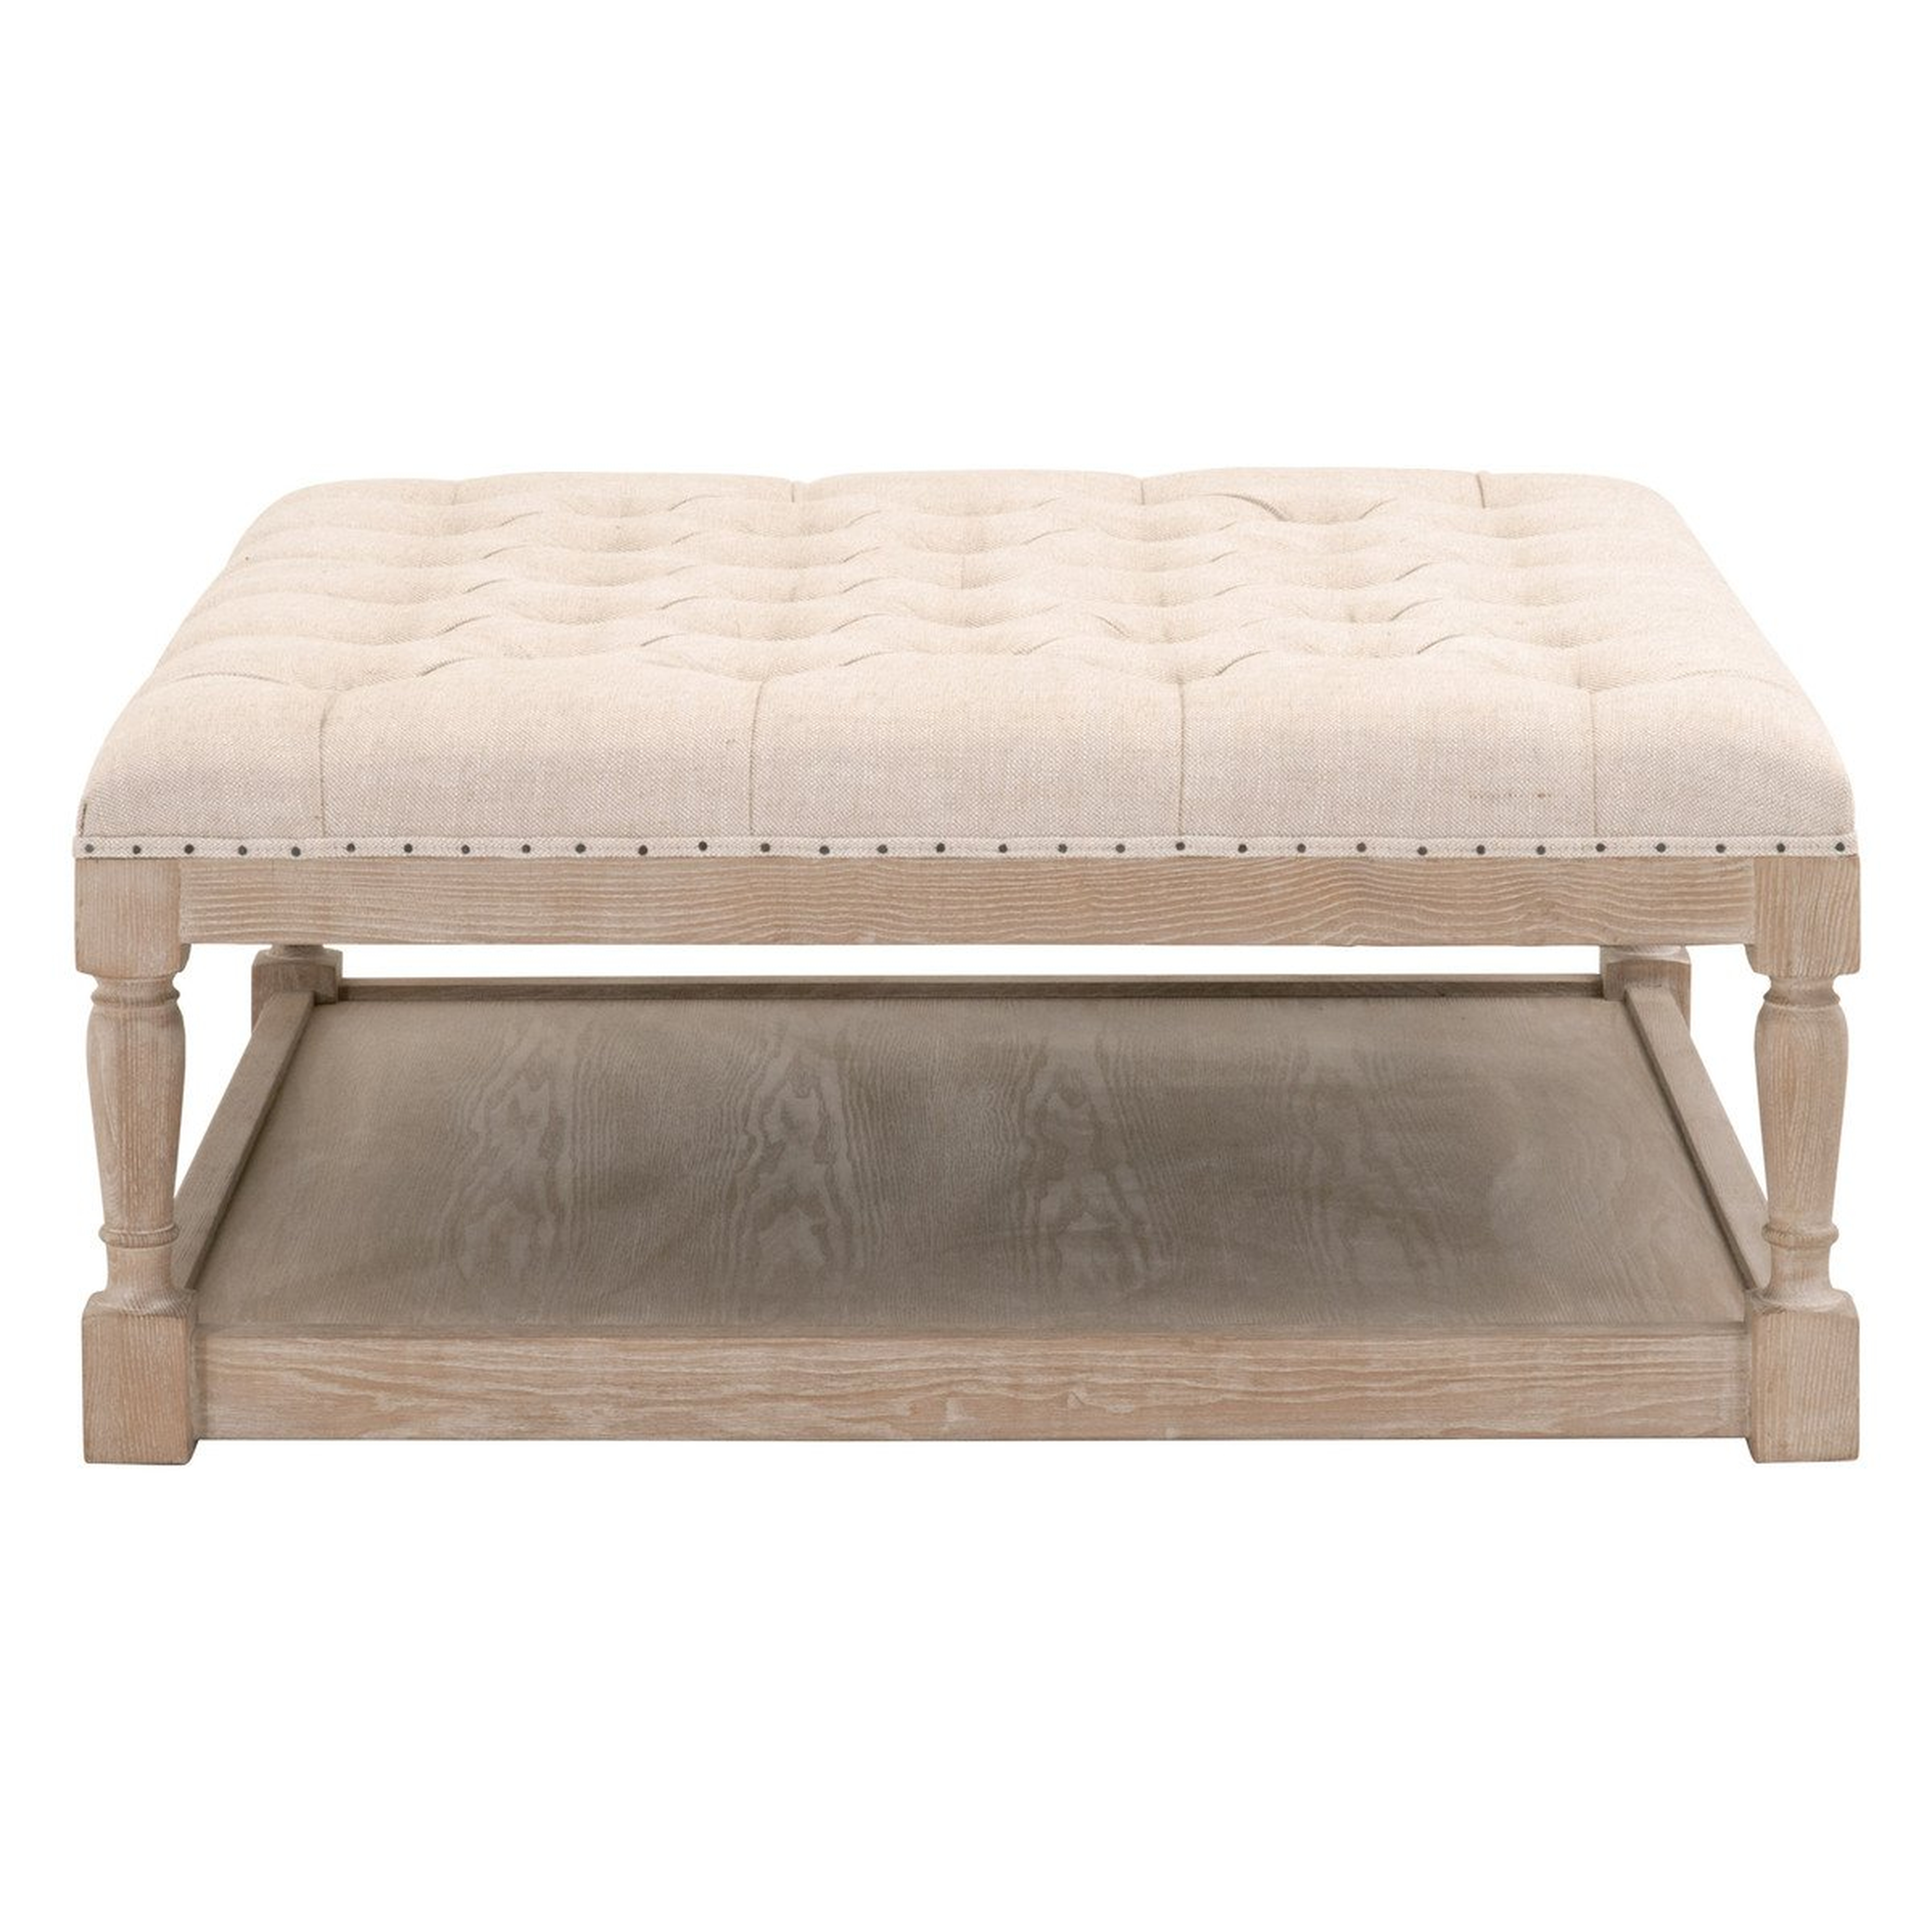 Townsend Tufted Upholstered Coffee Table, Bisque French Linen - Alder House